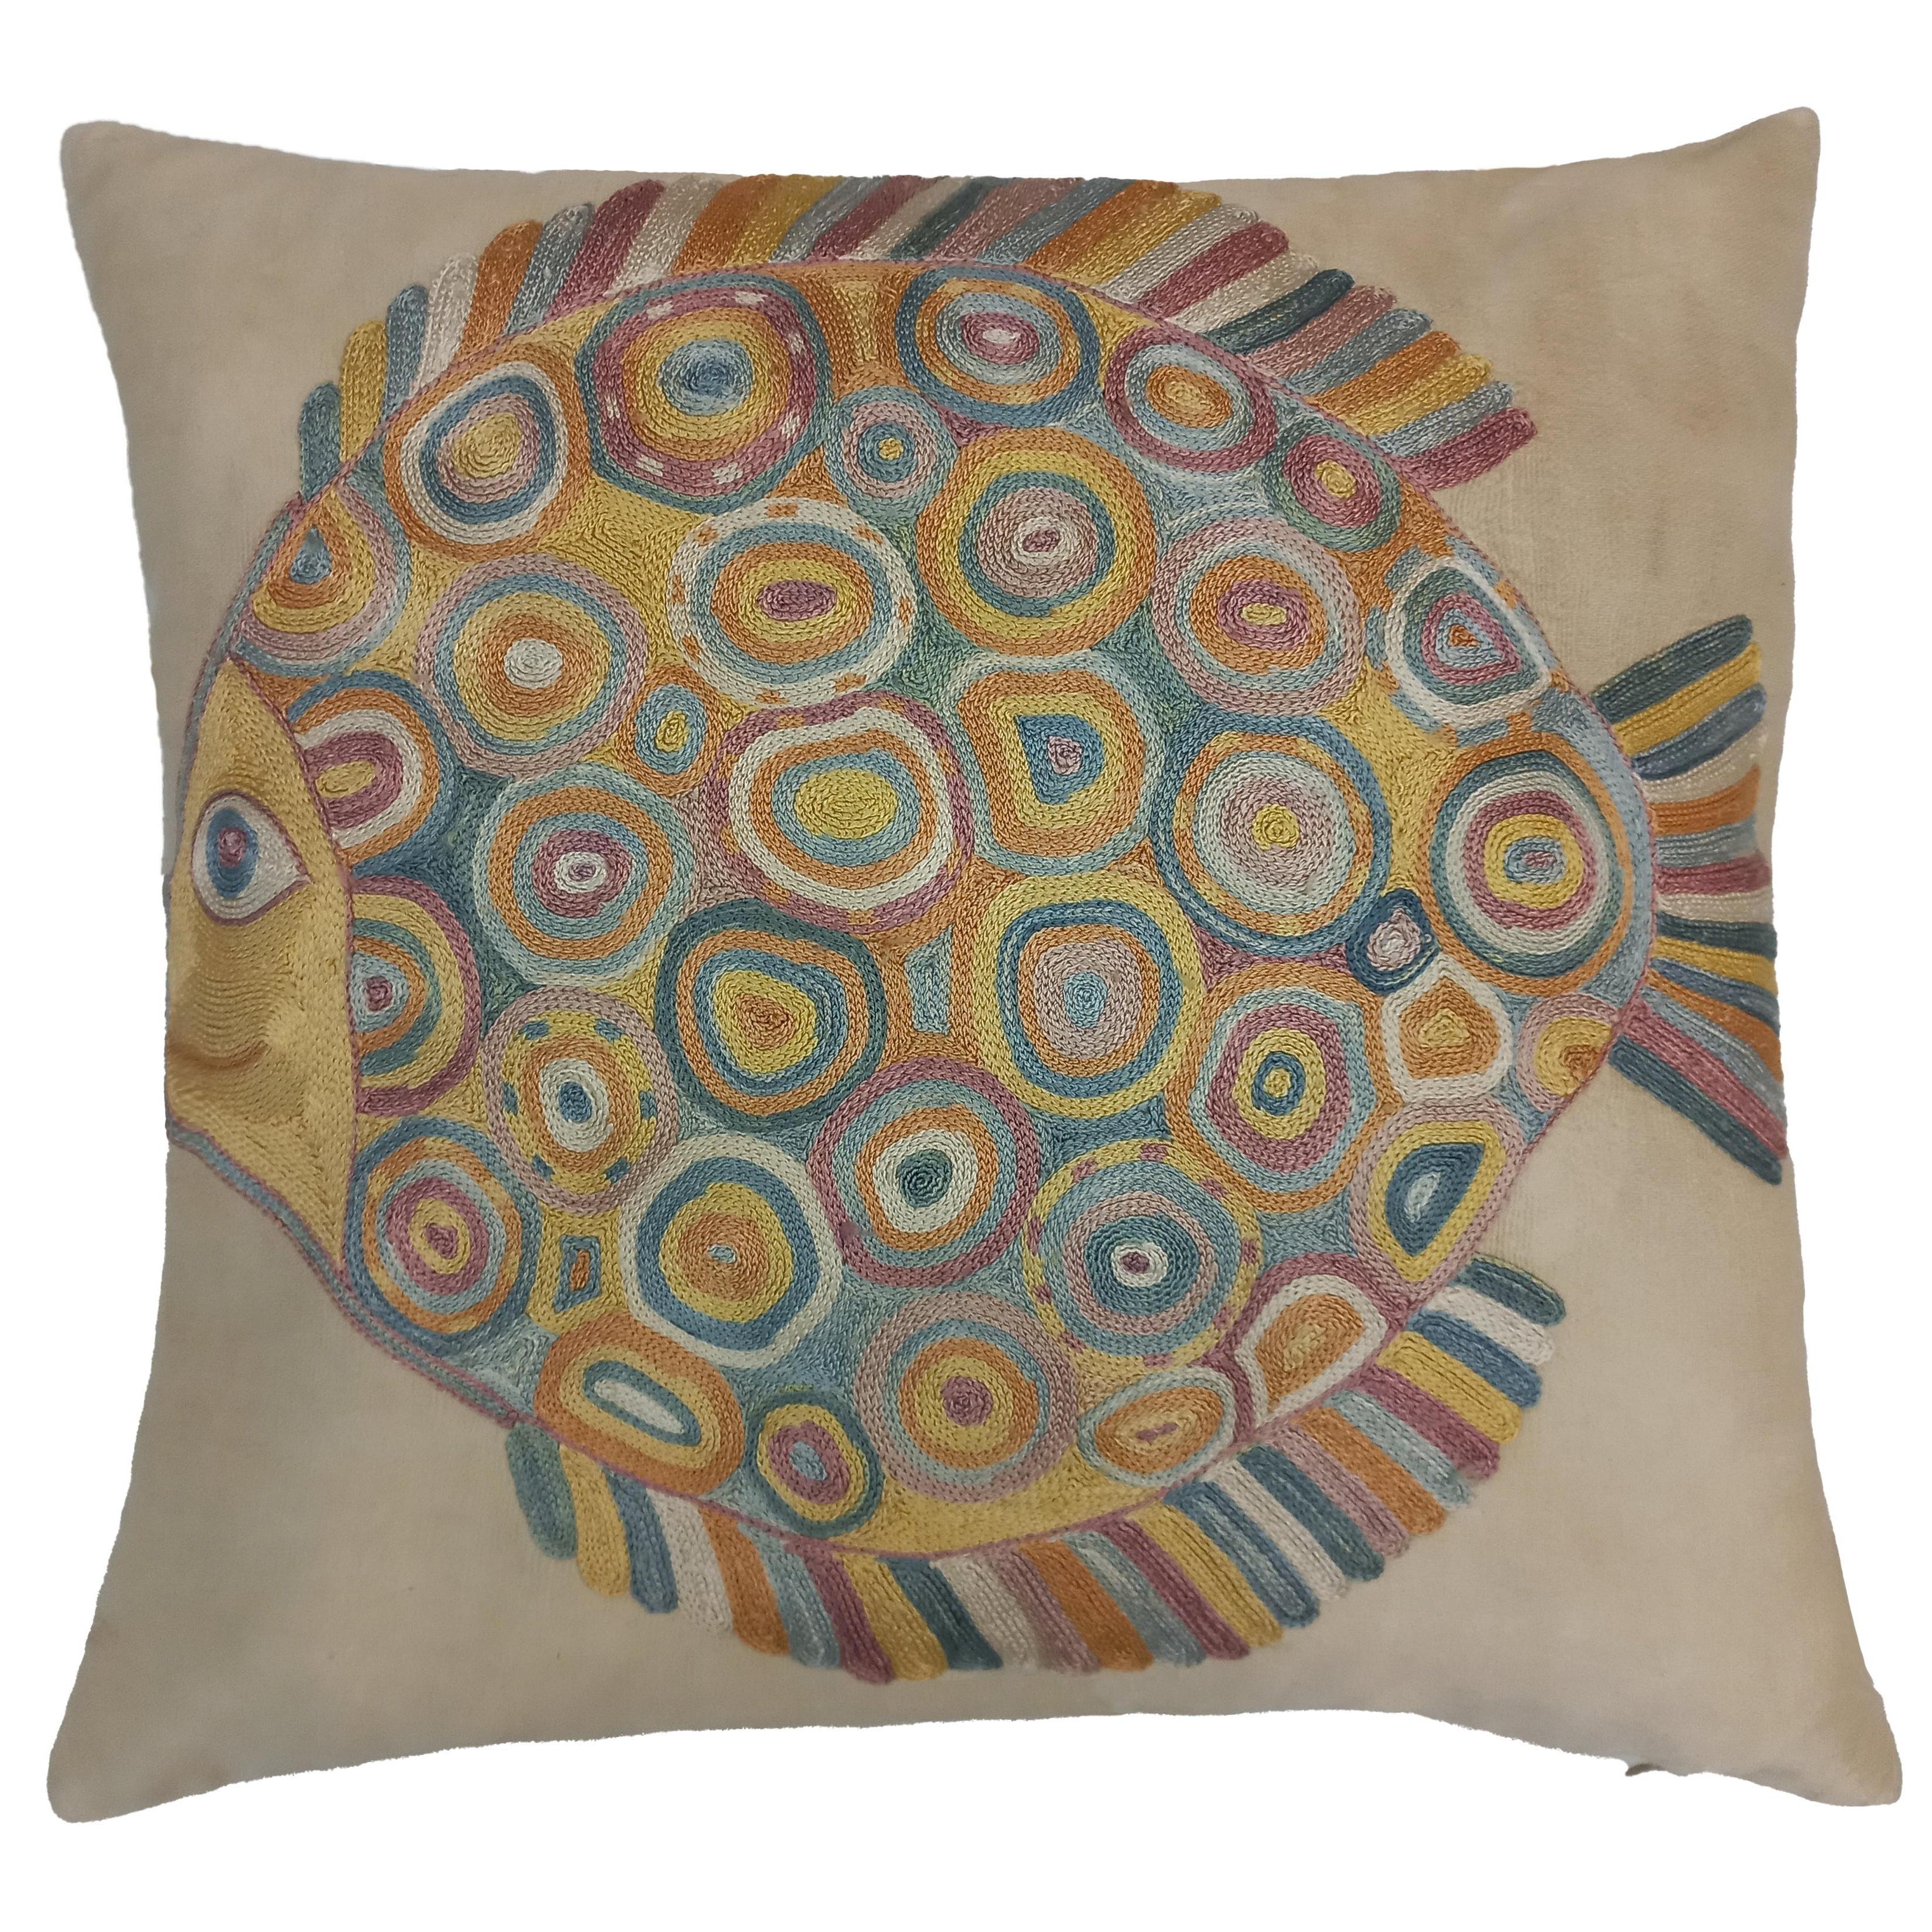 19"x20" 100% Silk Embroidered Suzani Cushion Cover, Fish Patterned Toss Pillow For Sale